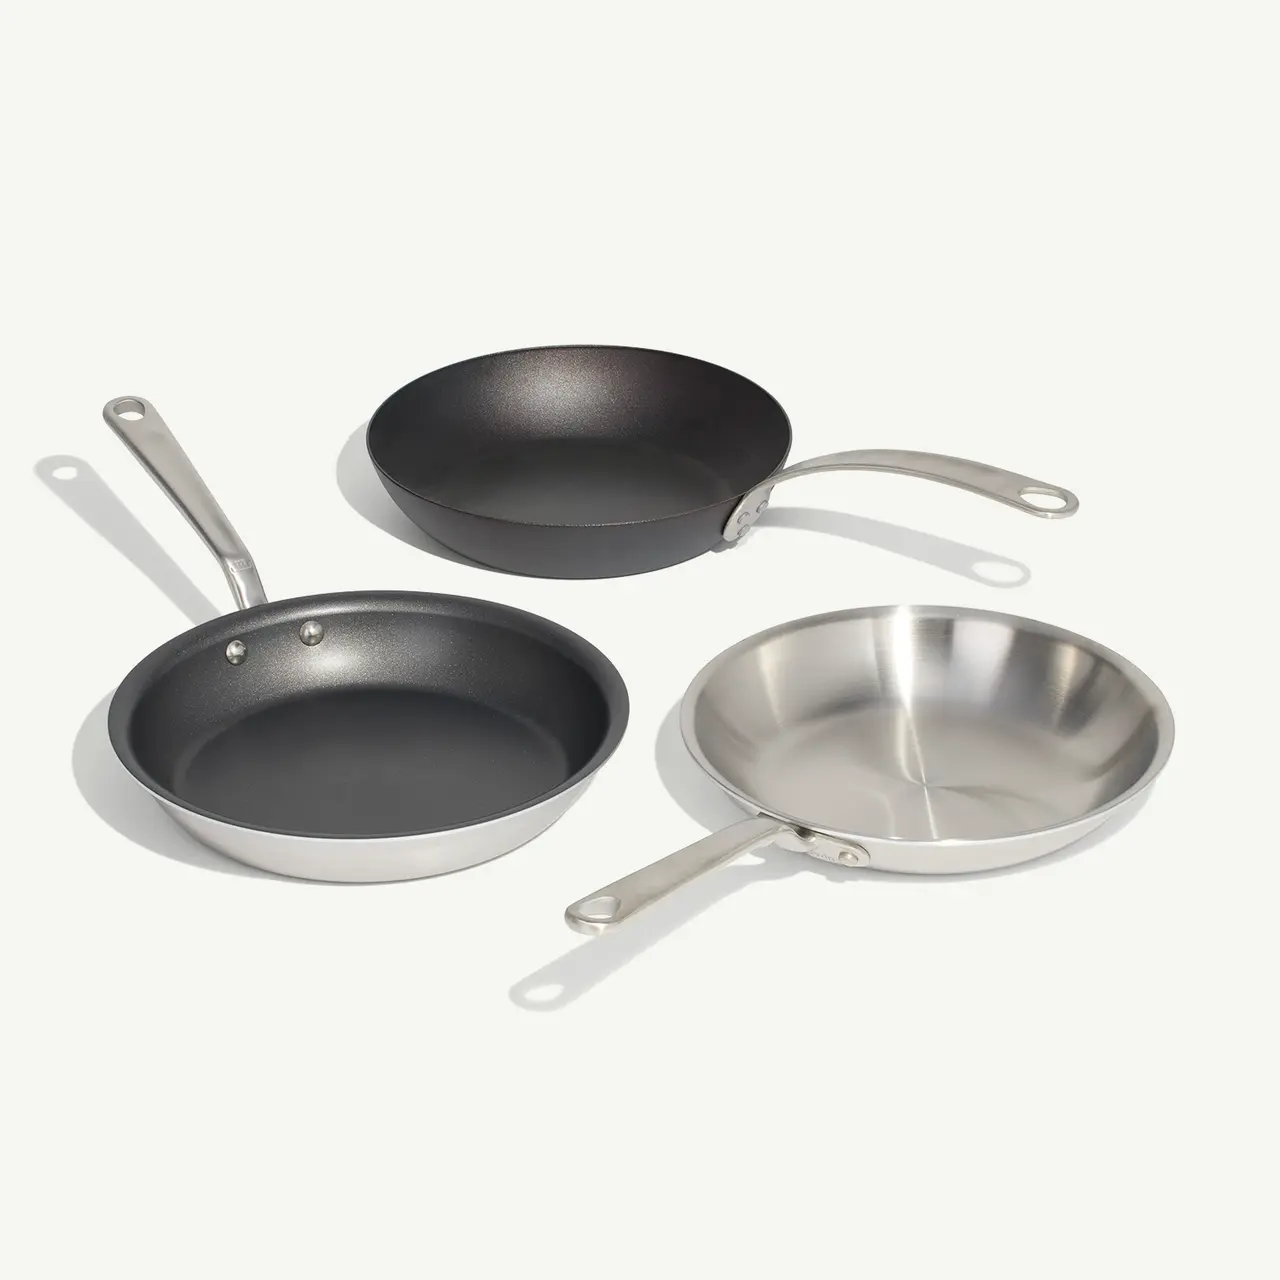 Three different types of frying pans with metal handles are arranged side by side on a plain background.